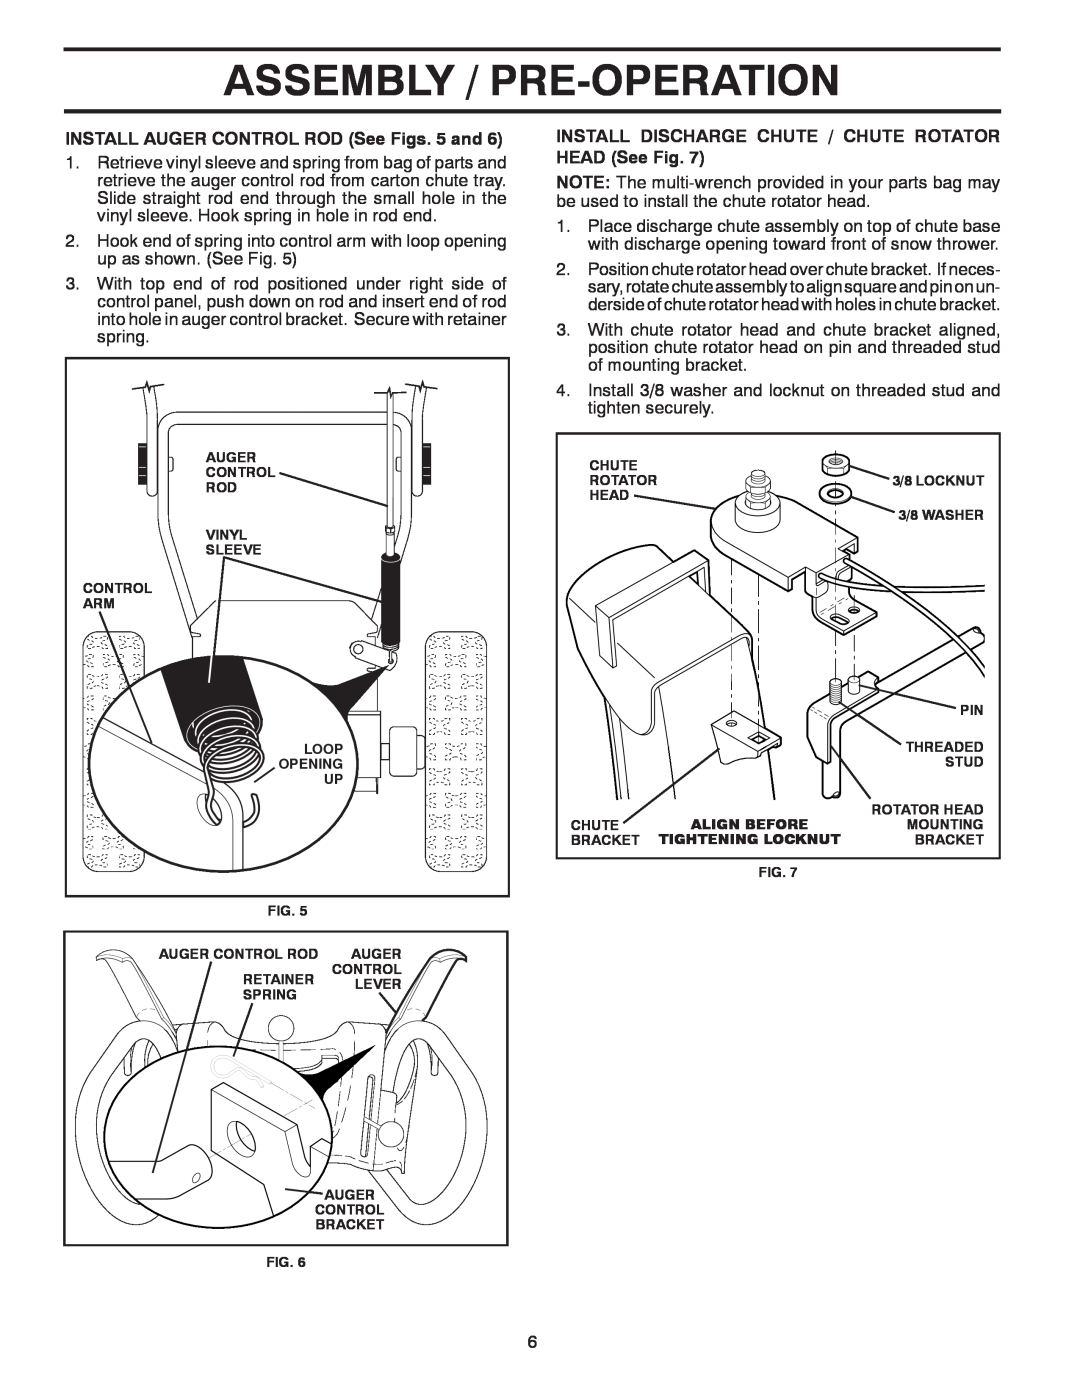 Poulan 428861, 96192003500, XT11530ES owner manual Assembly / Pre-Operation, INSTALL AUGER CONTROL ROD See Figs. 5 and 